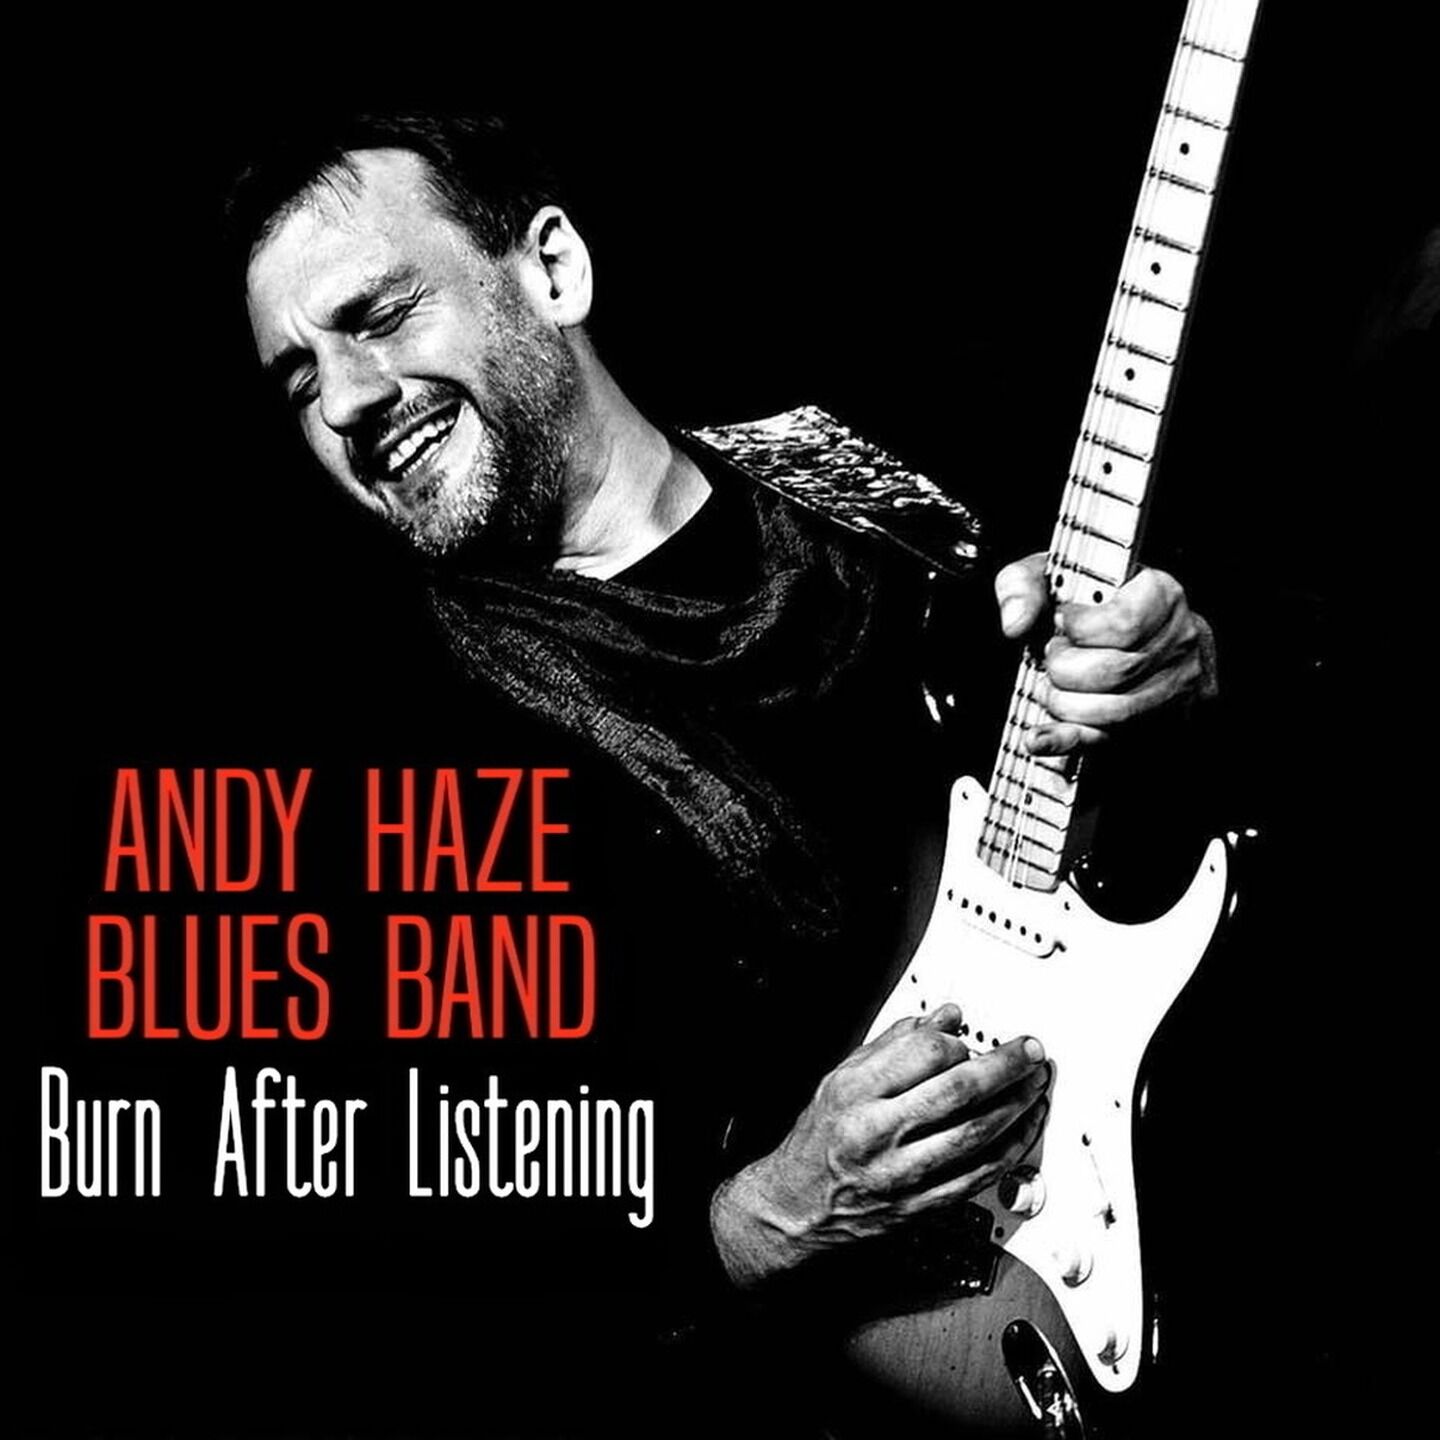 Andy Haze Blues Band - Burn After Listening